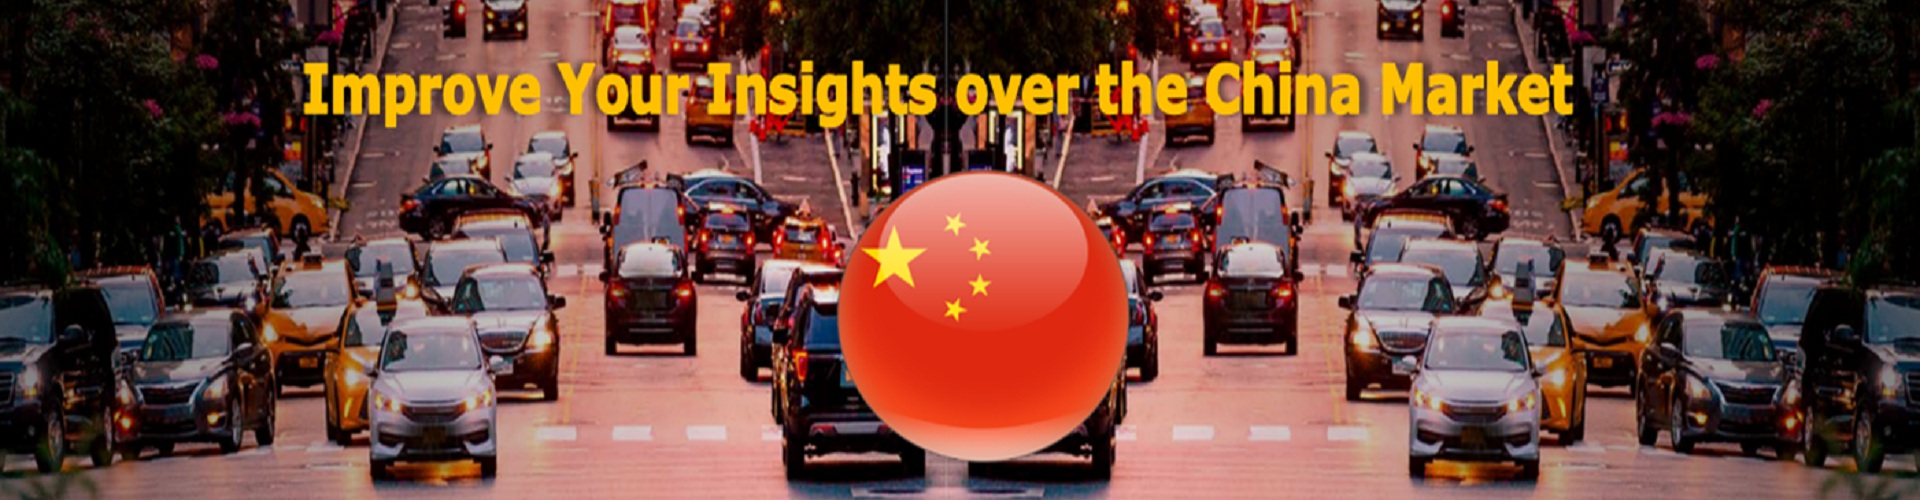 improve-your-insights-over-the-Chinese-market